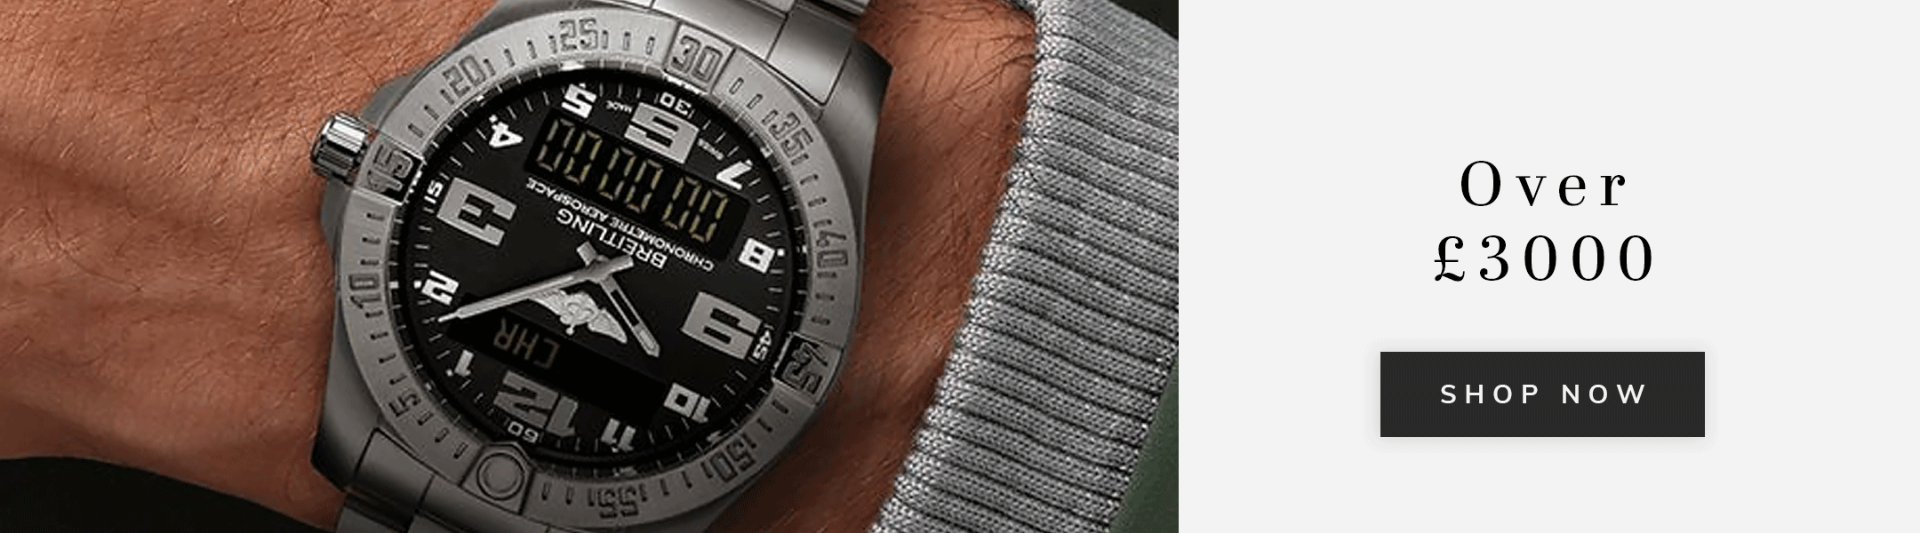 A Breitling watch with text over £3000 shop now